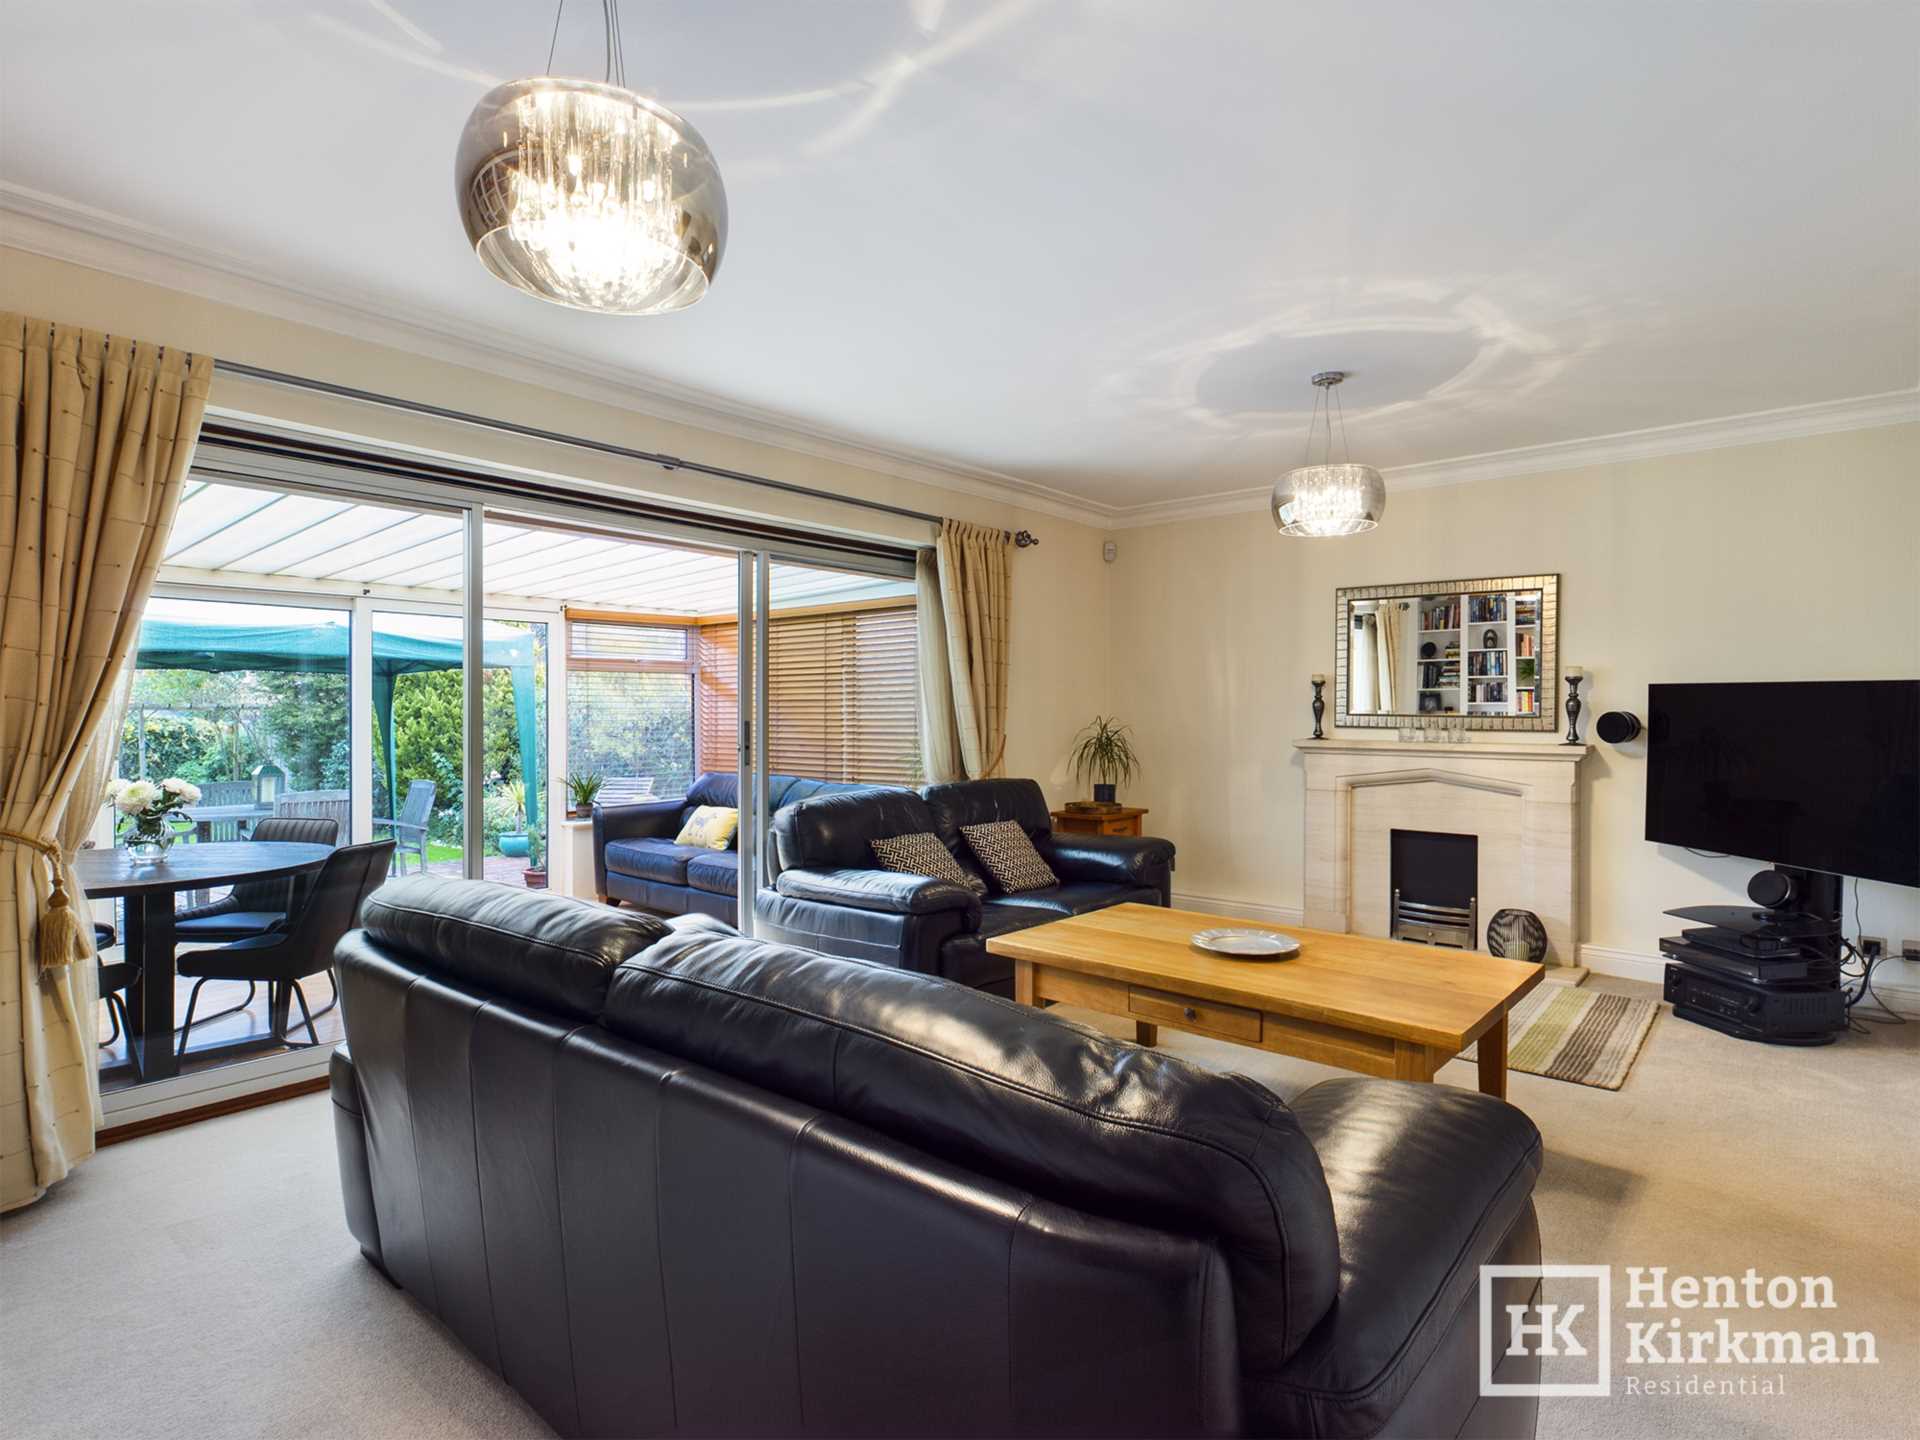 Norsey View Drive, Billericay, Image 9